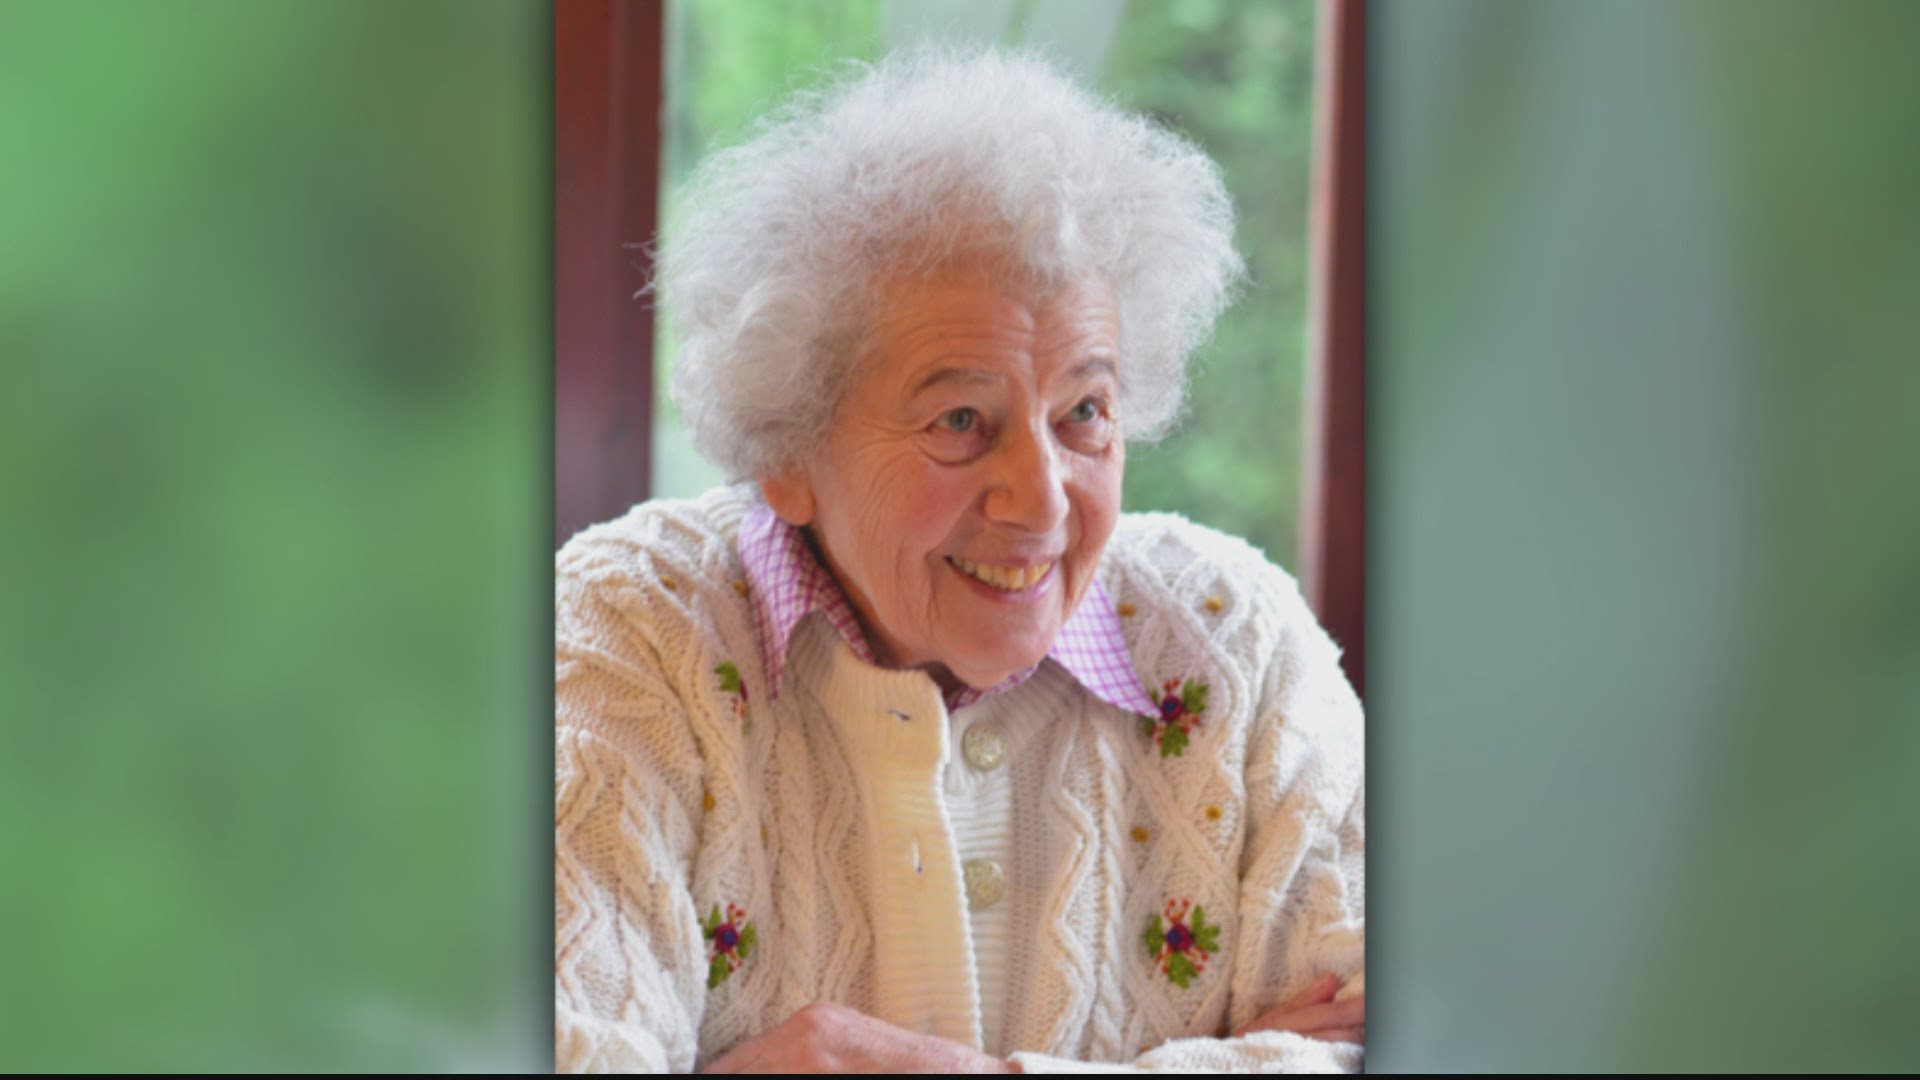 A retired Iowa State University professor spoke with Local 5 on the death of her friend Ruth David, a Holocaust survivor who died from COVID-19.